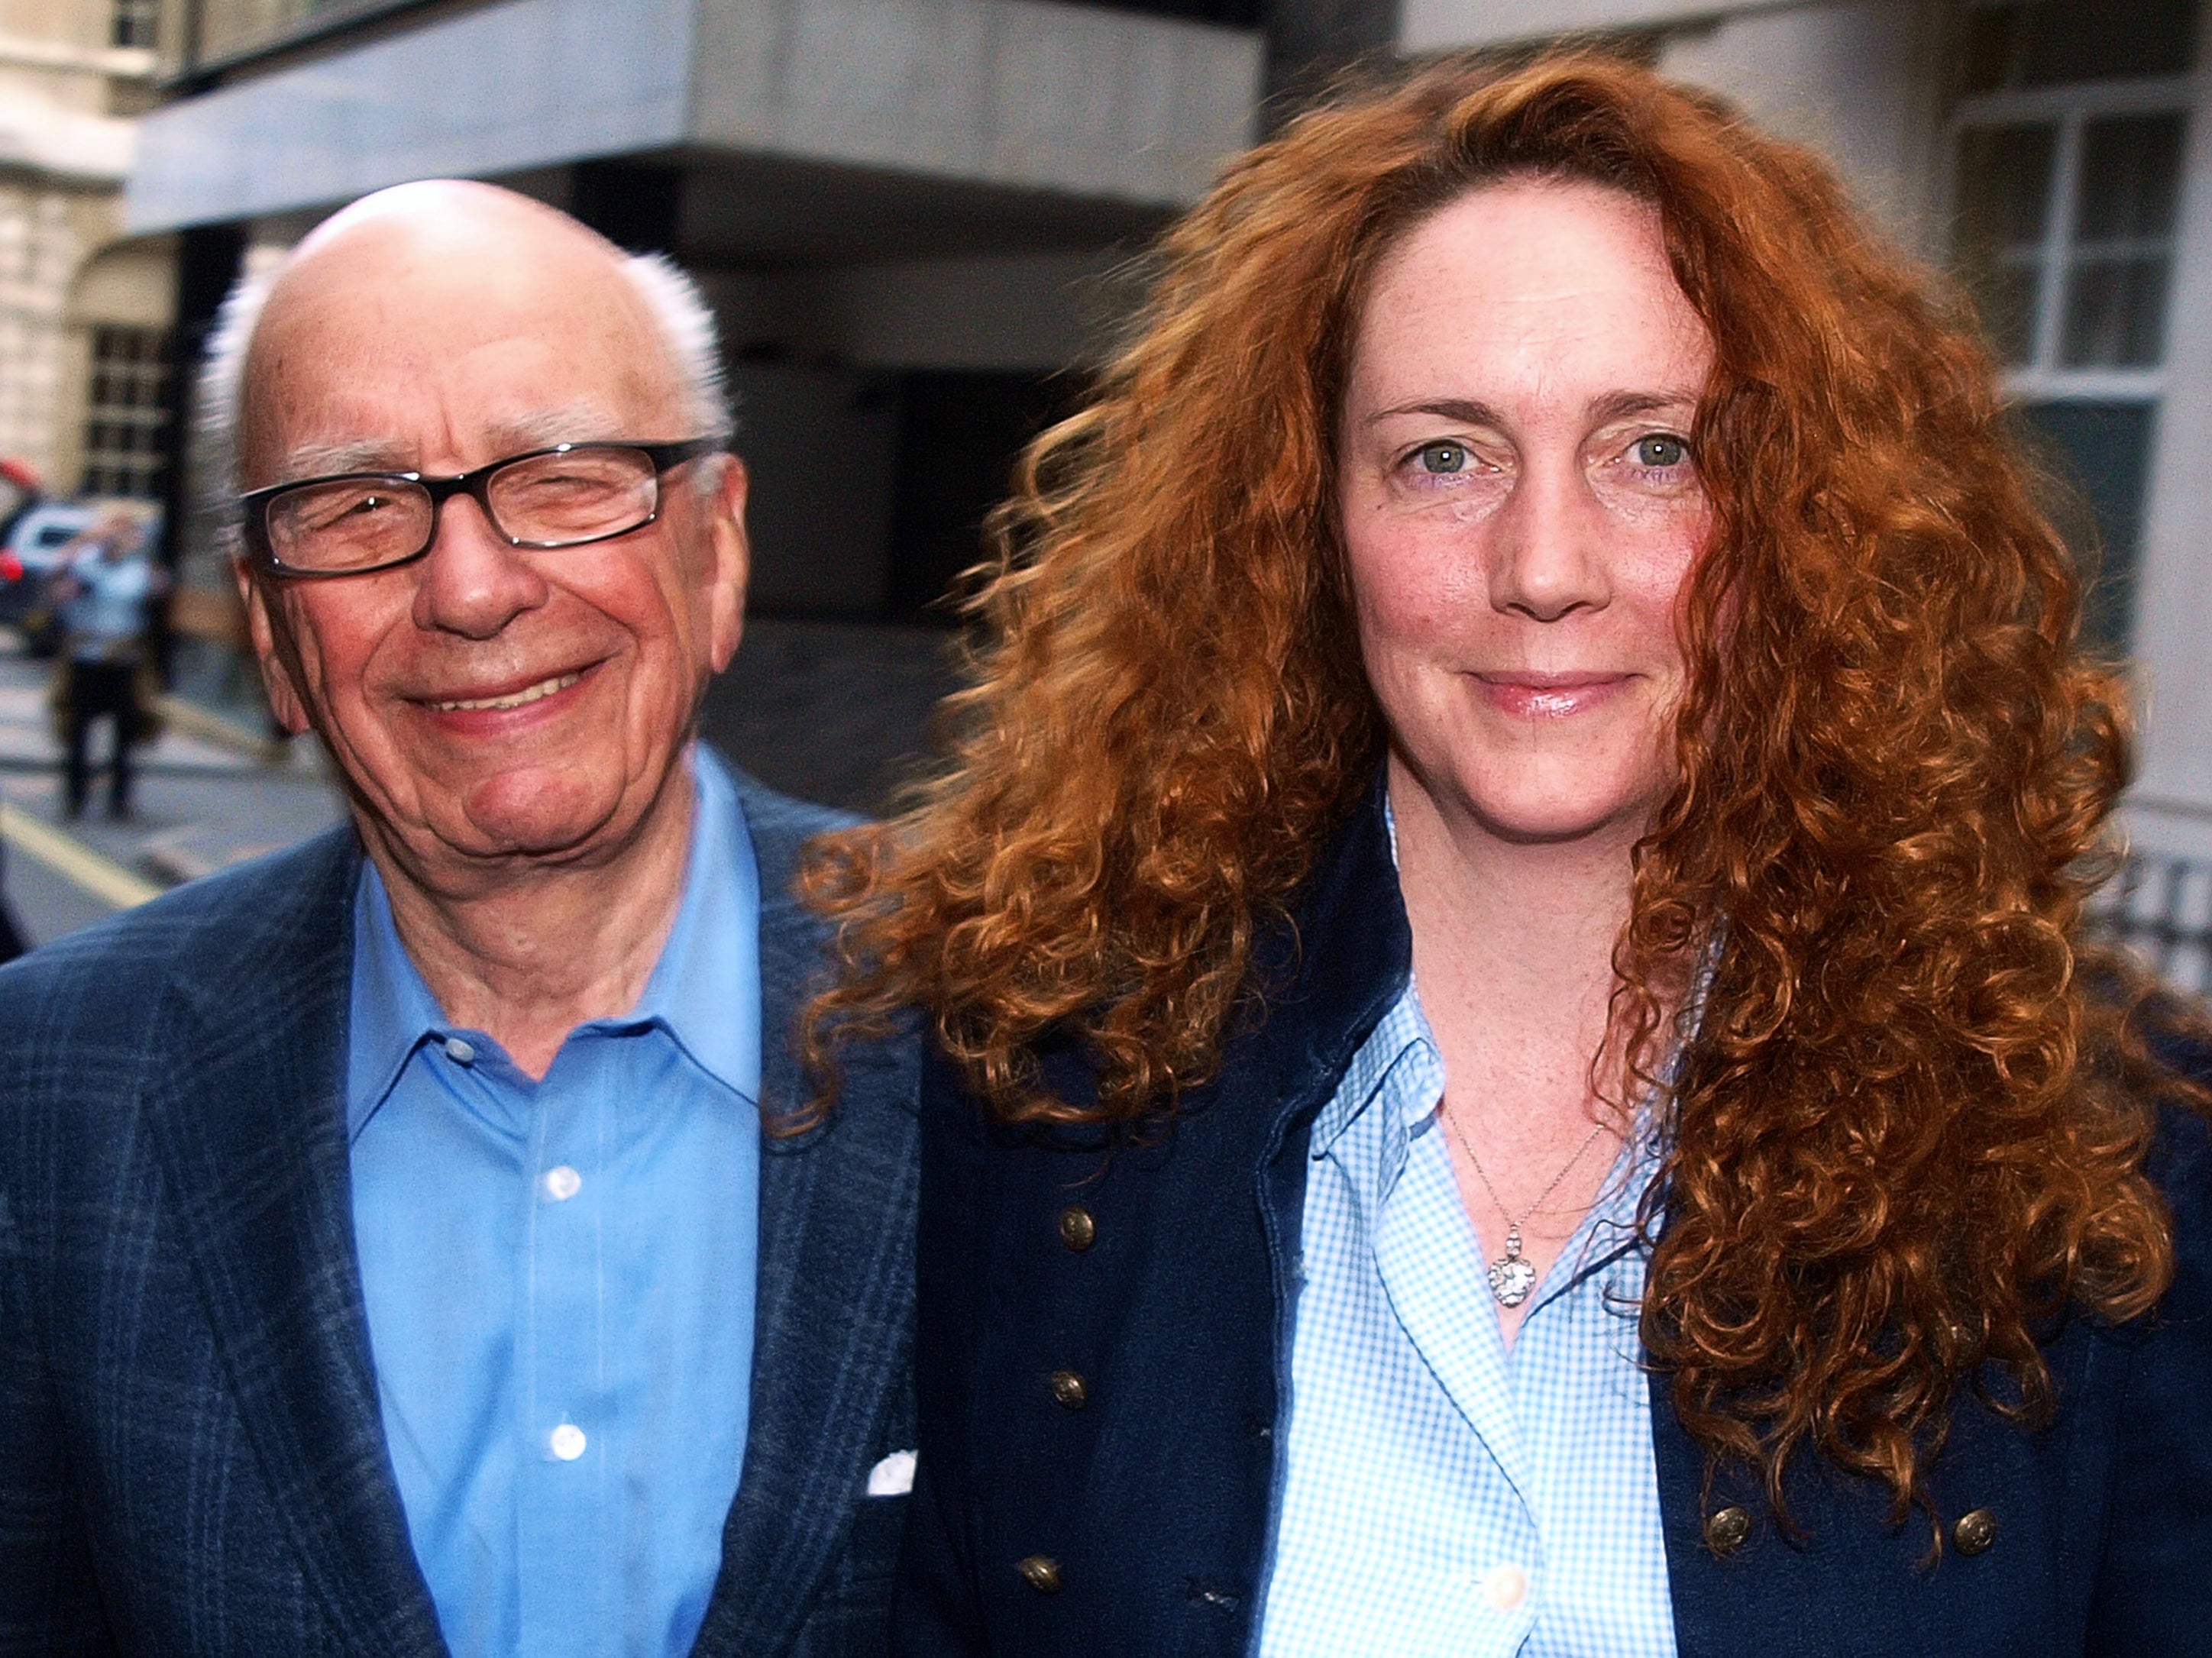 News UK CEO Rebekah Brooks and Rupert Murdoch are pictured together in London in 2011